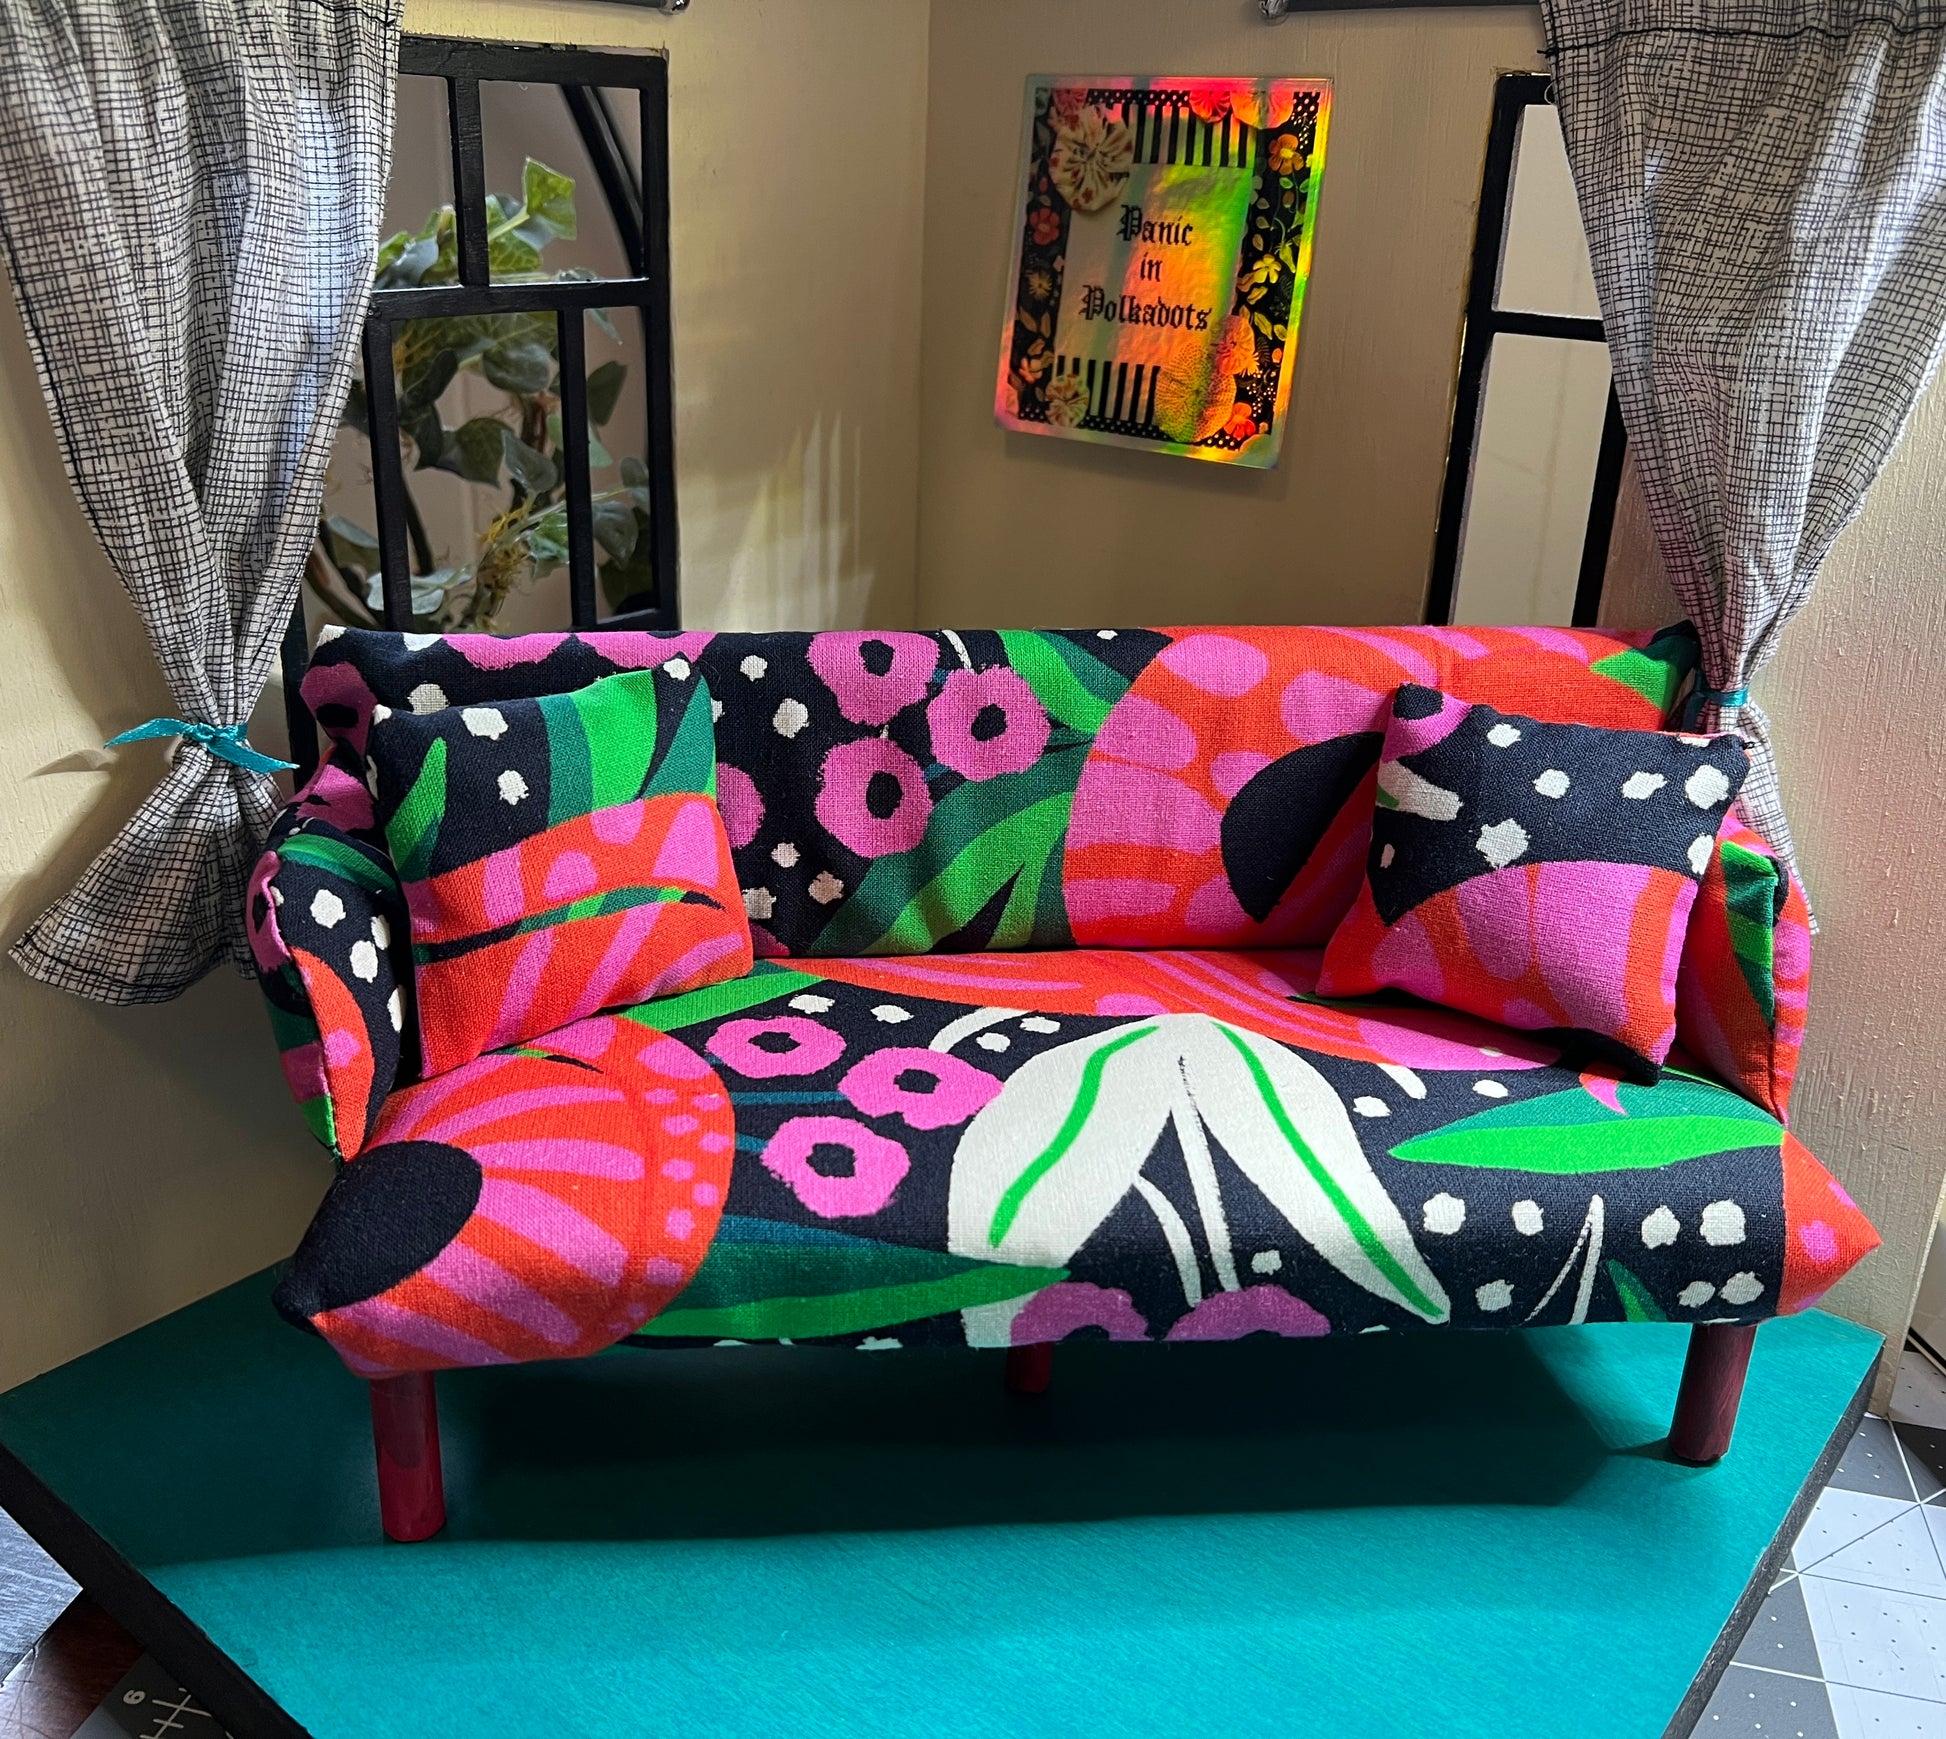 handmade Barbie doll couch, in a dollhouse setting for scale, includes two pillows by Panic in Polkadots. Bright floral snake graphic fabric in pinks, reds, greens, and white and black